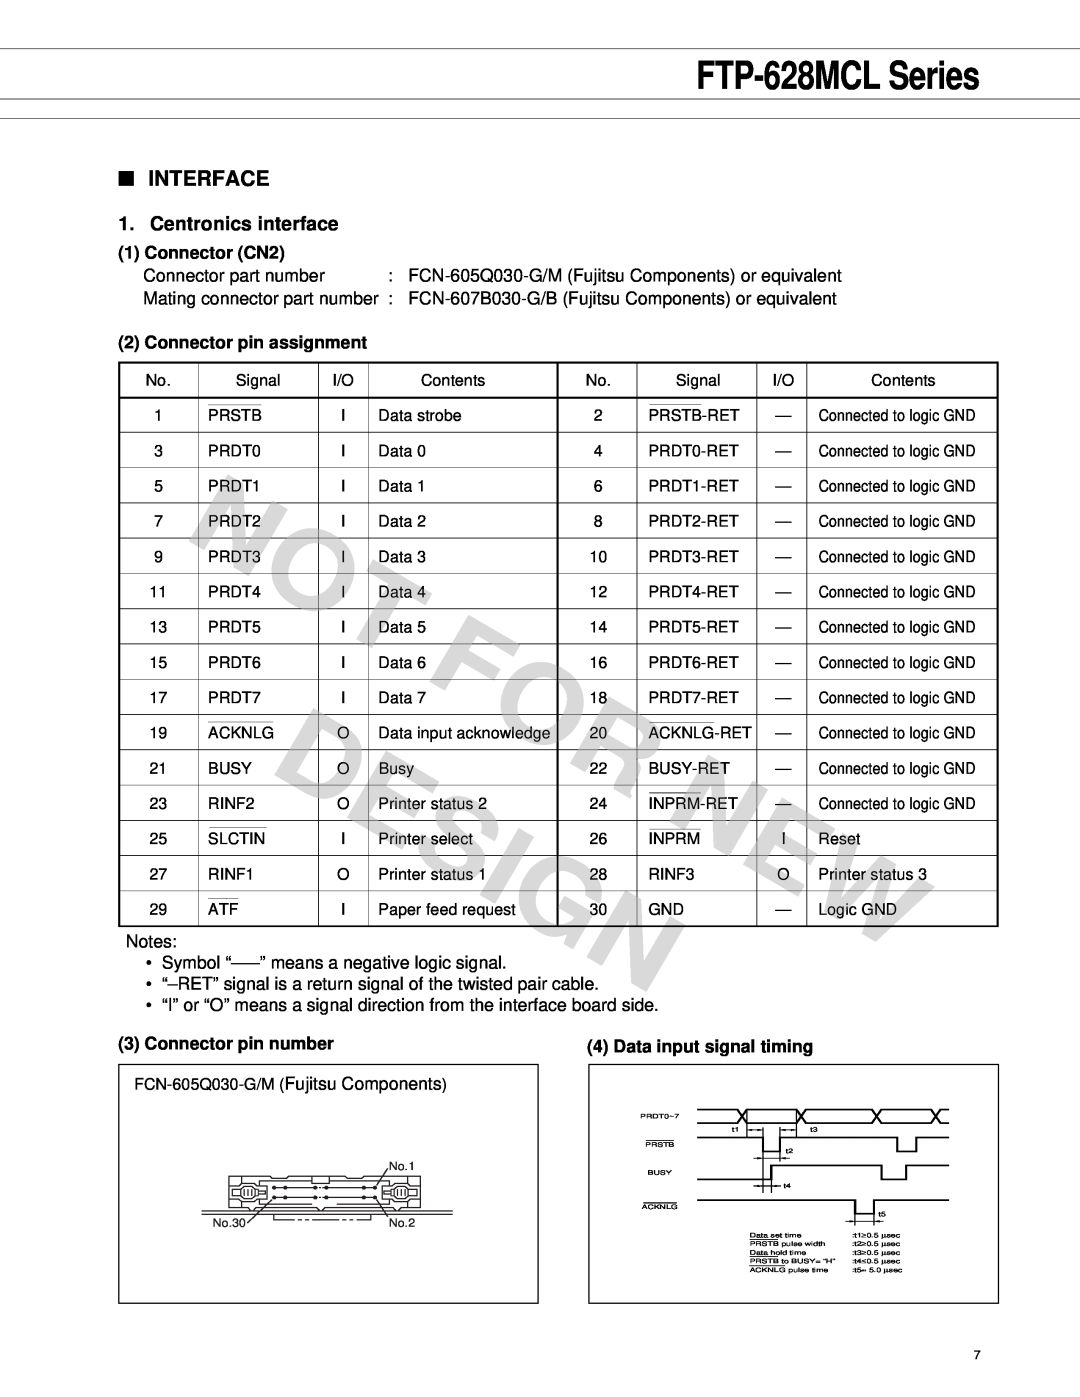 Fujitsu FTP-628 Series Interface, Centronics interface, Connector CN2, Connector pin assignment, Connector pin number 